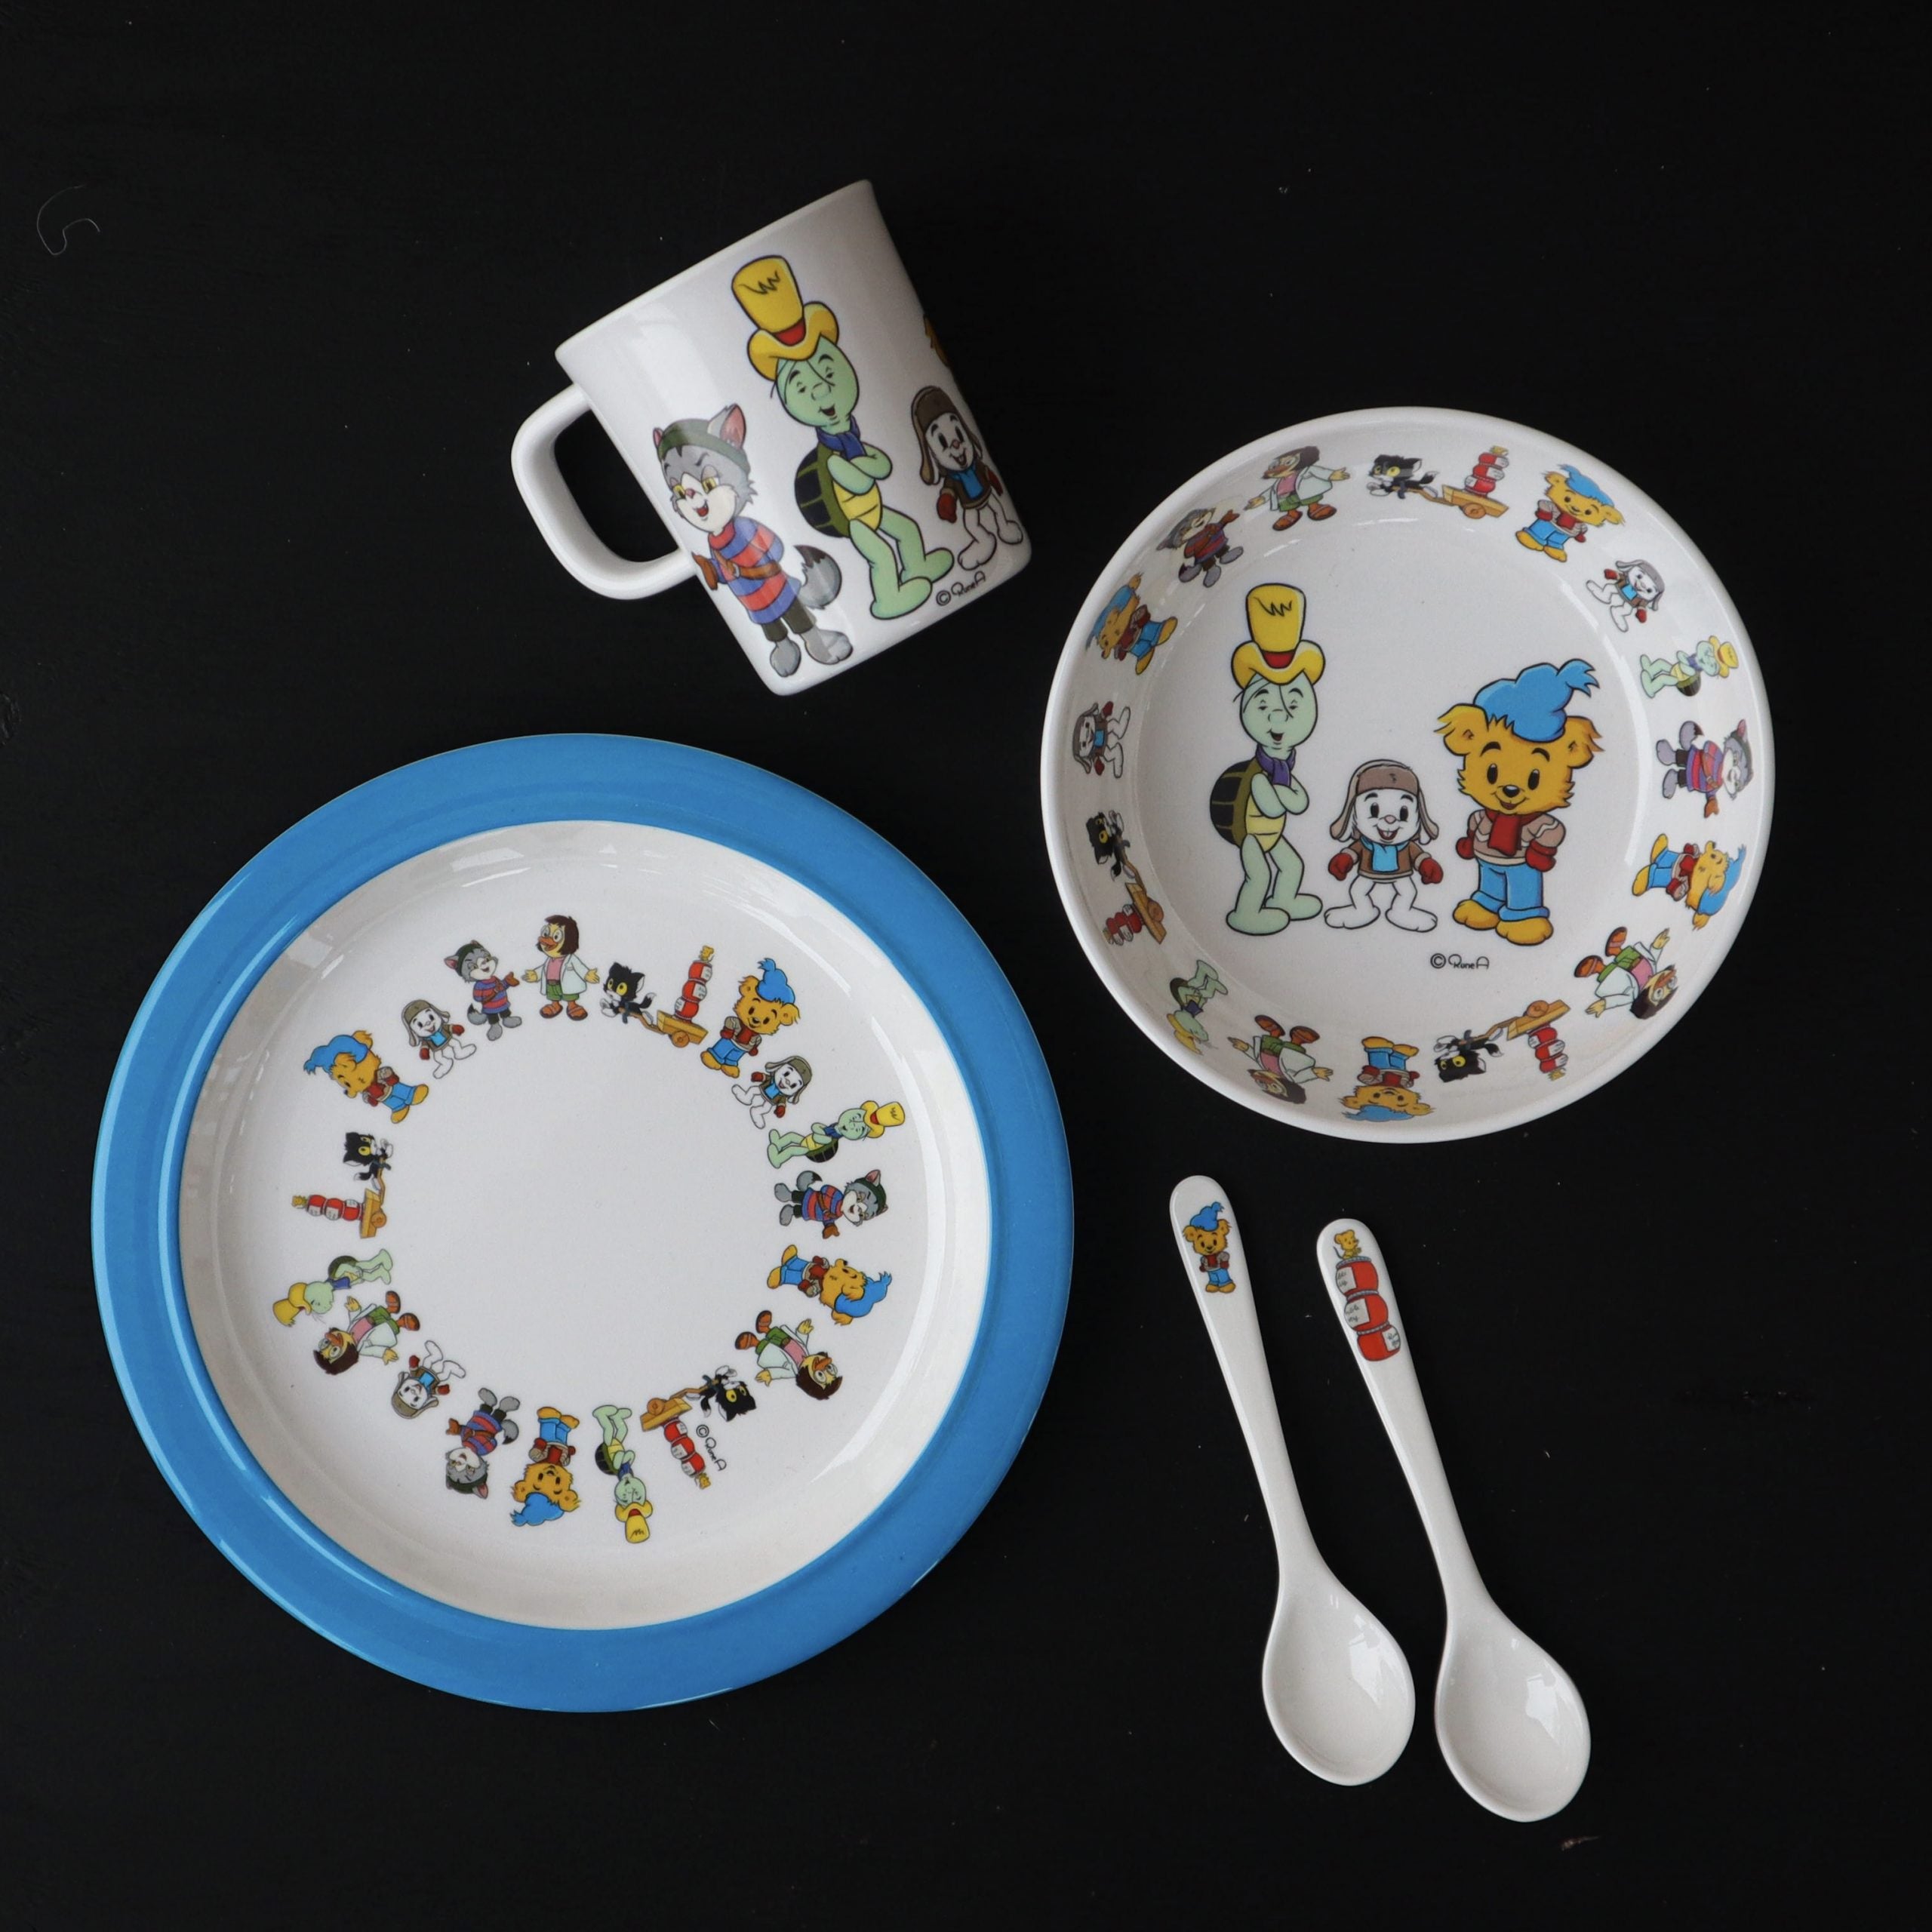 Bamse, Spoons, 2-pack Volcanic Island